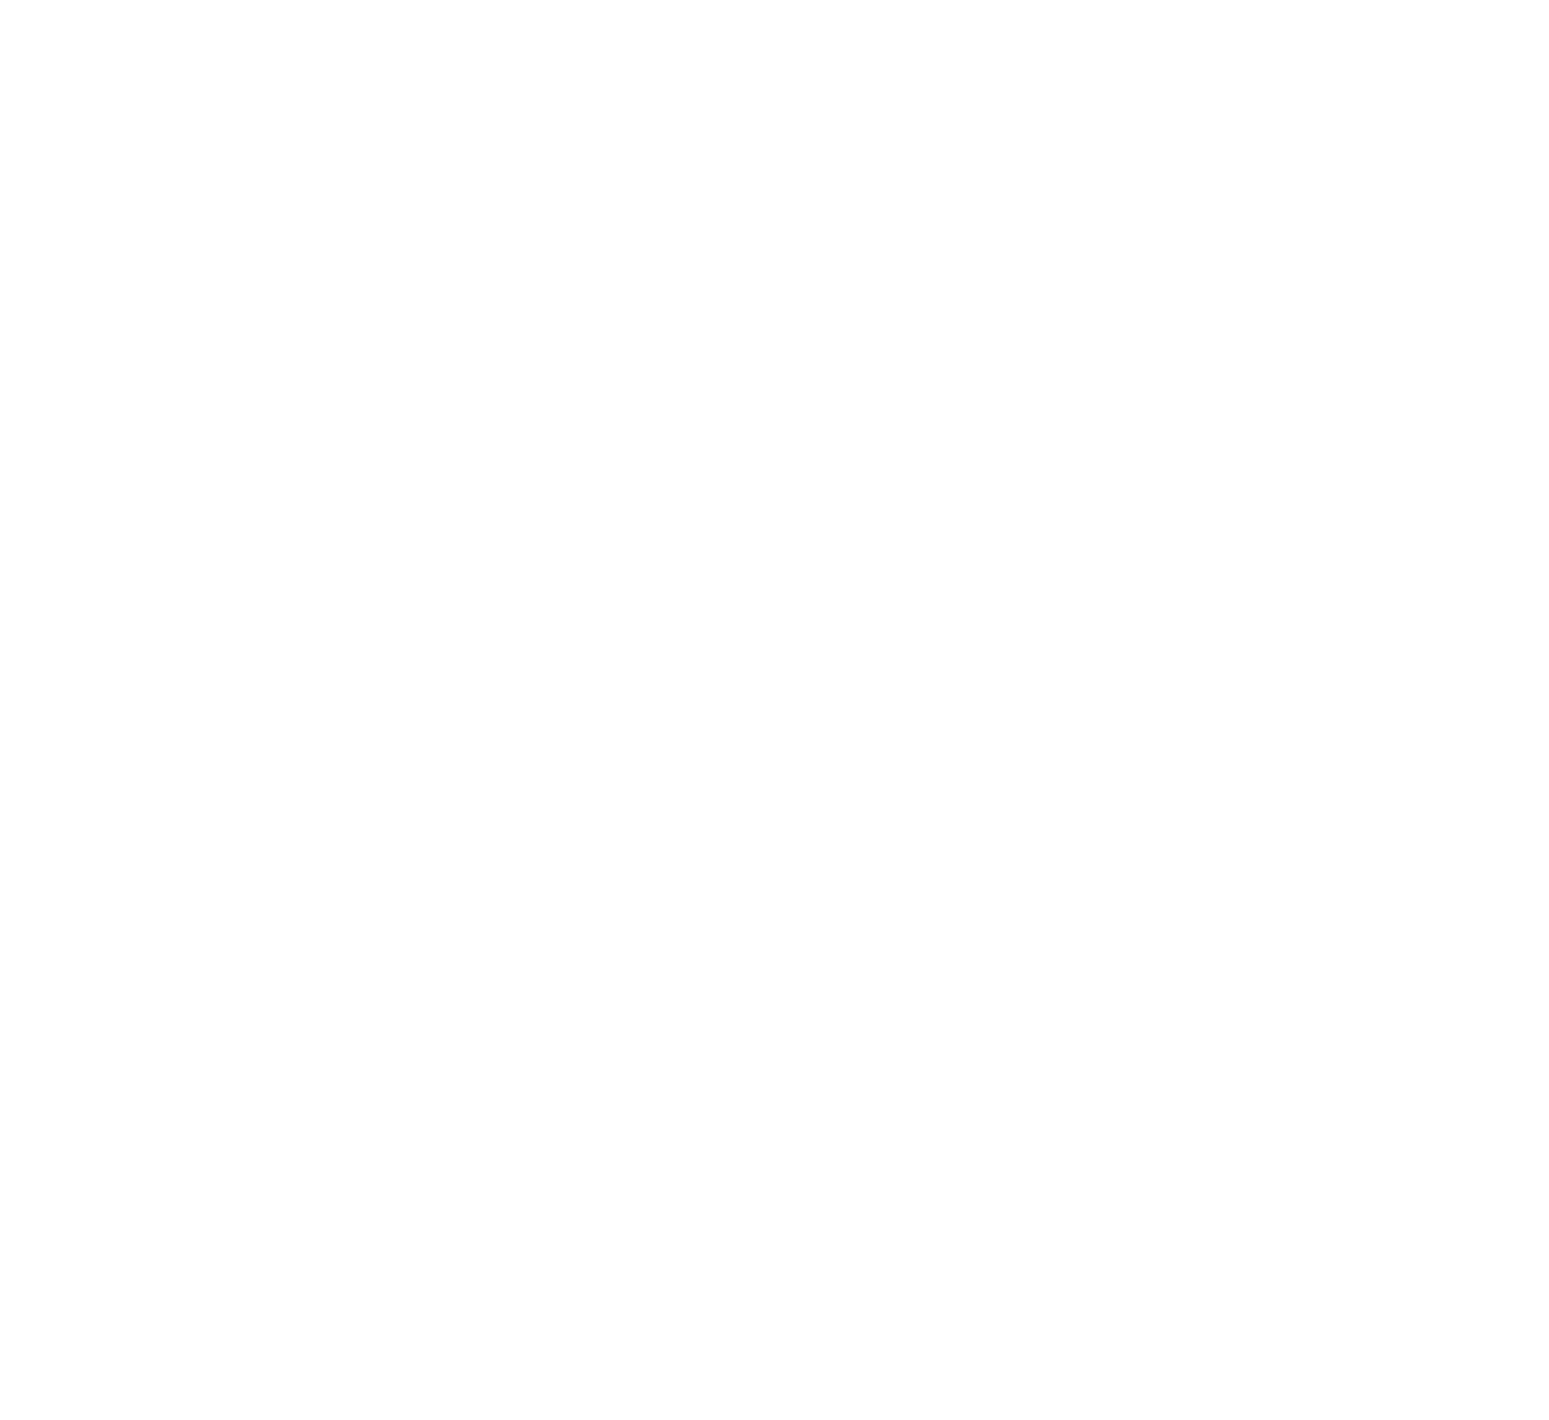 Boursa Kuwait Securities Company logo large for dark backgrounds (transparent PNG)